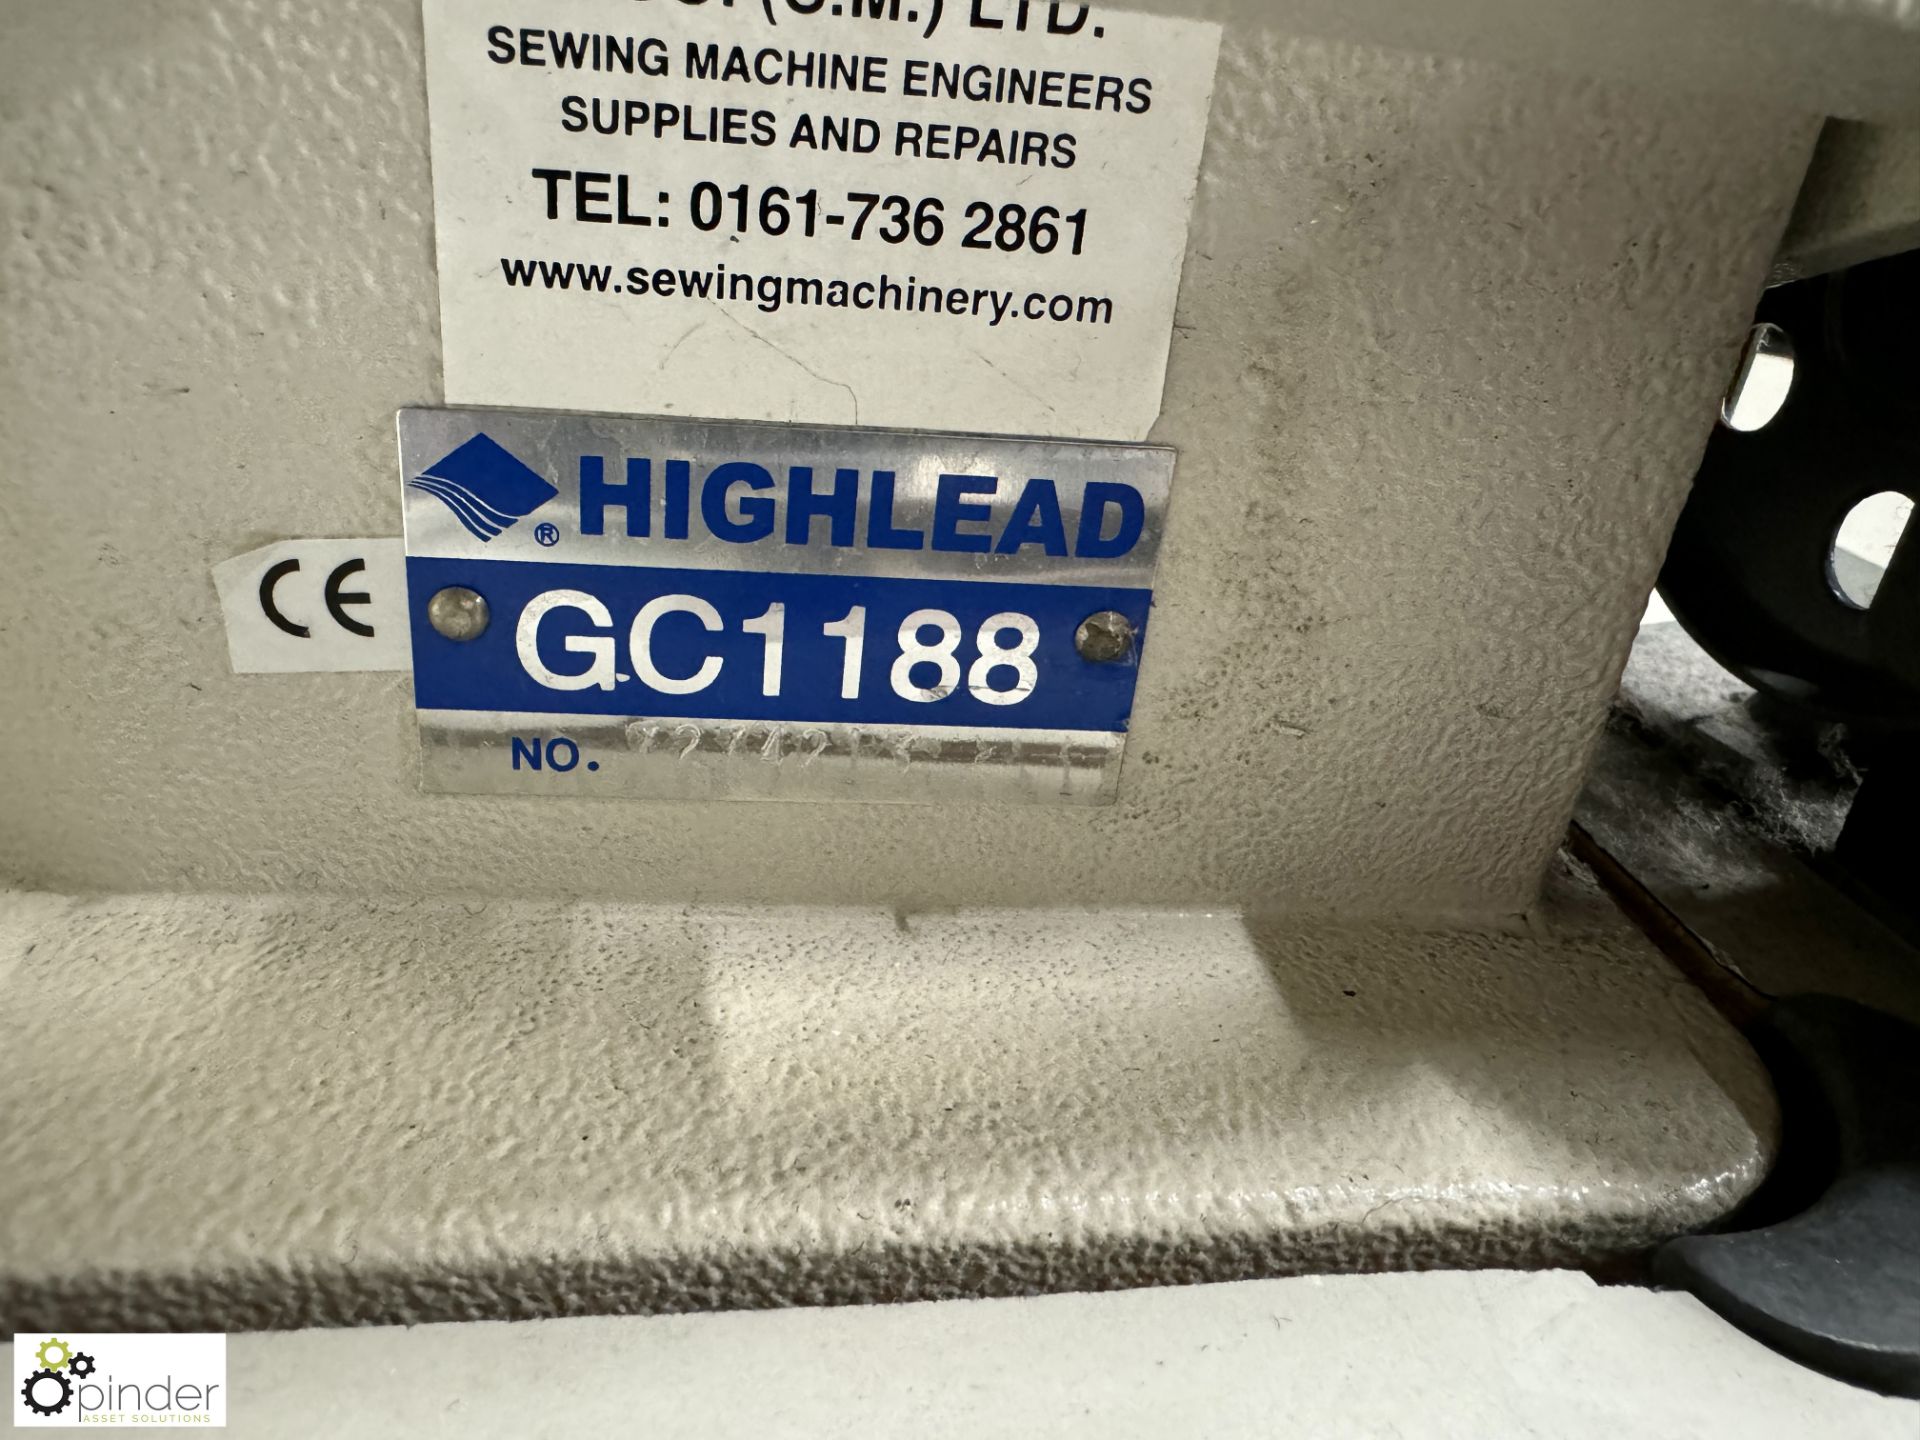 Highlead GC1188 flat bed Lockstitch, 240volts - Image 3 of 5